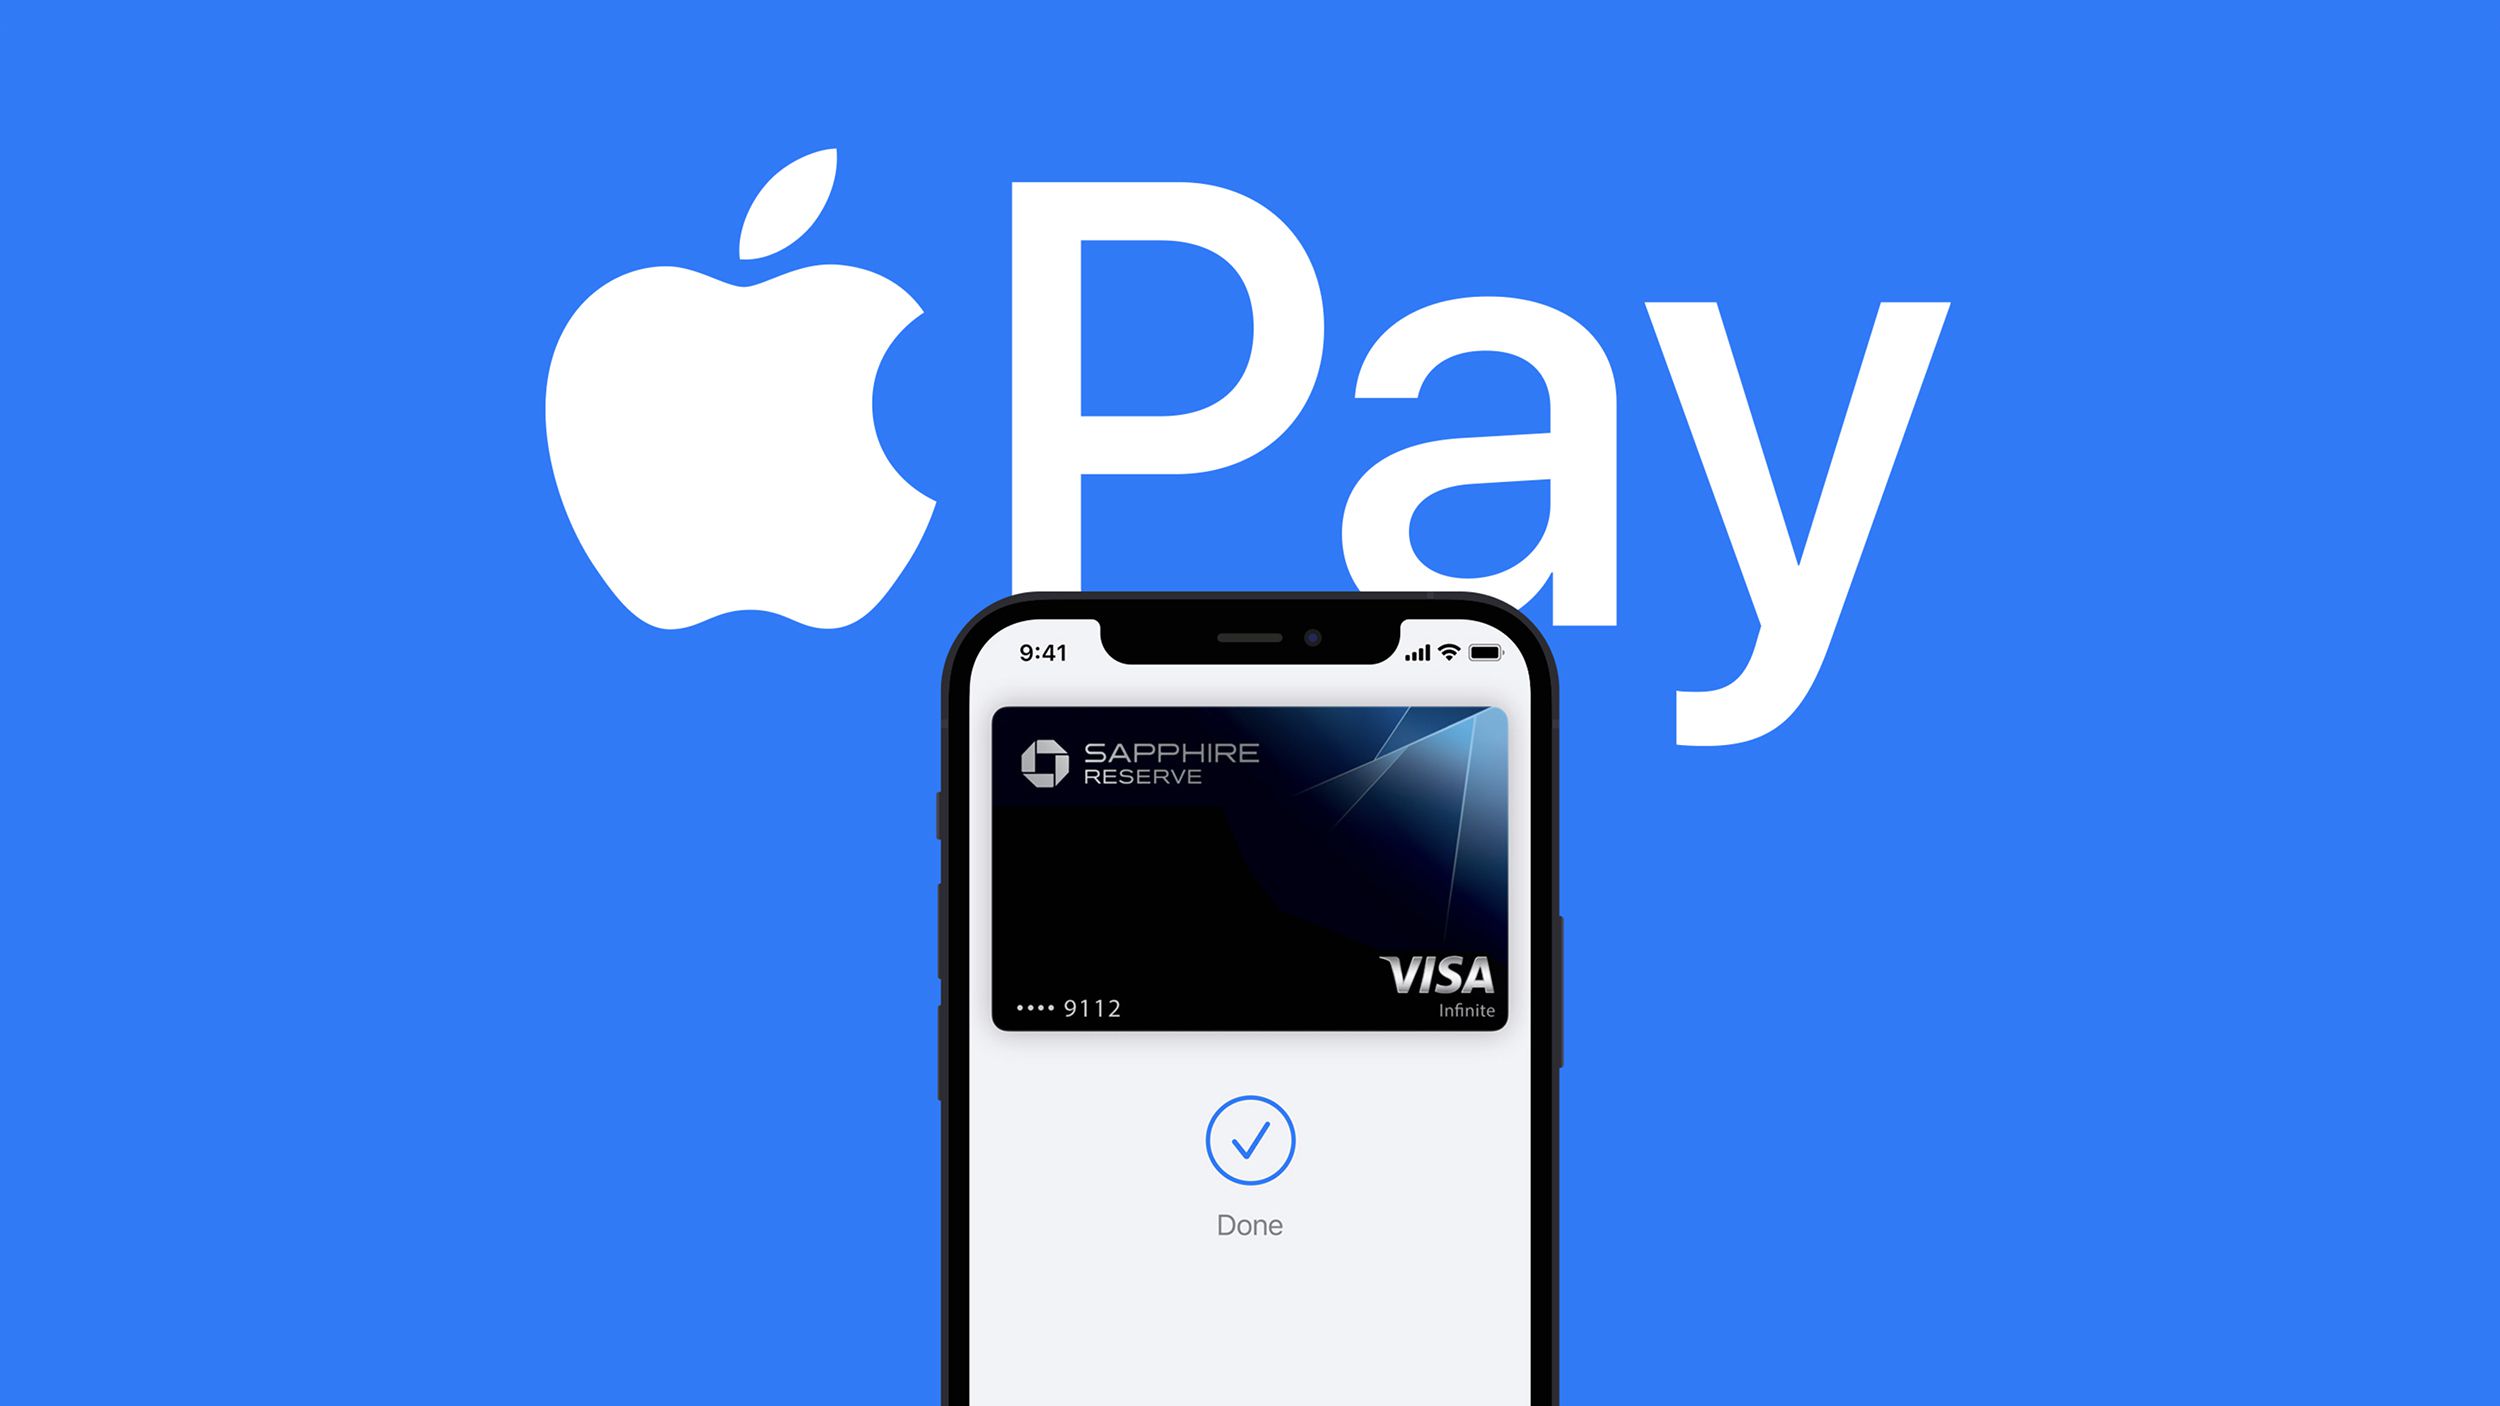 Apple Store Purchases Made With Apple Pay in U.S. Will Support the National Park..